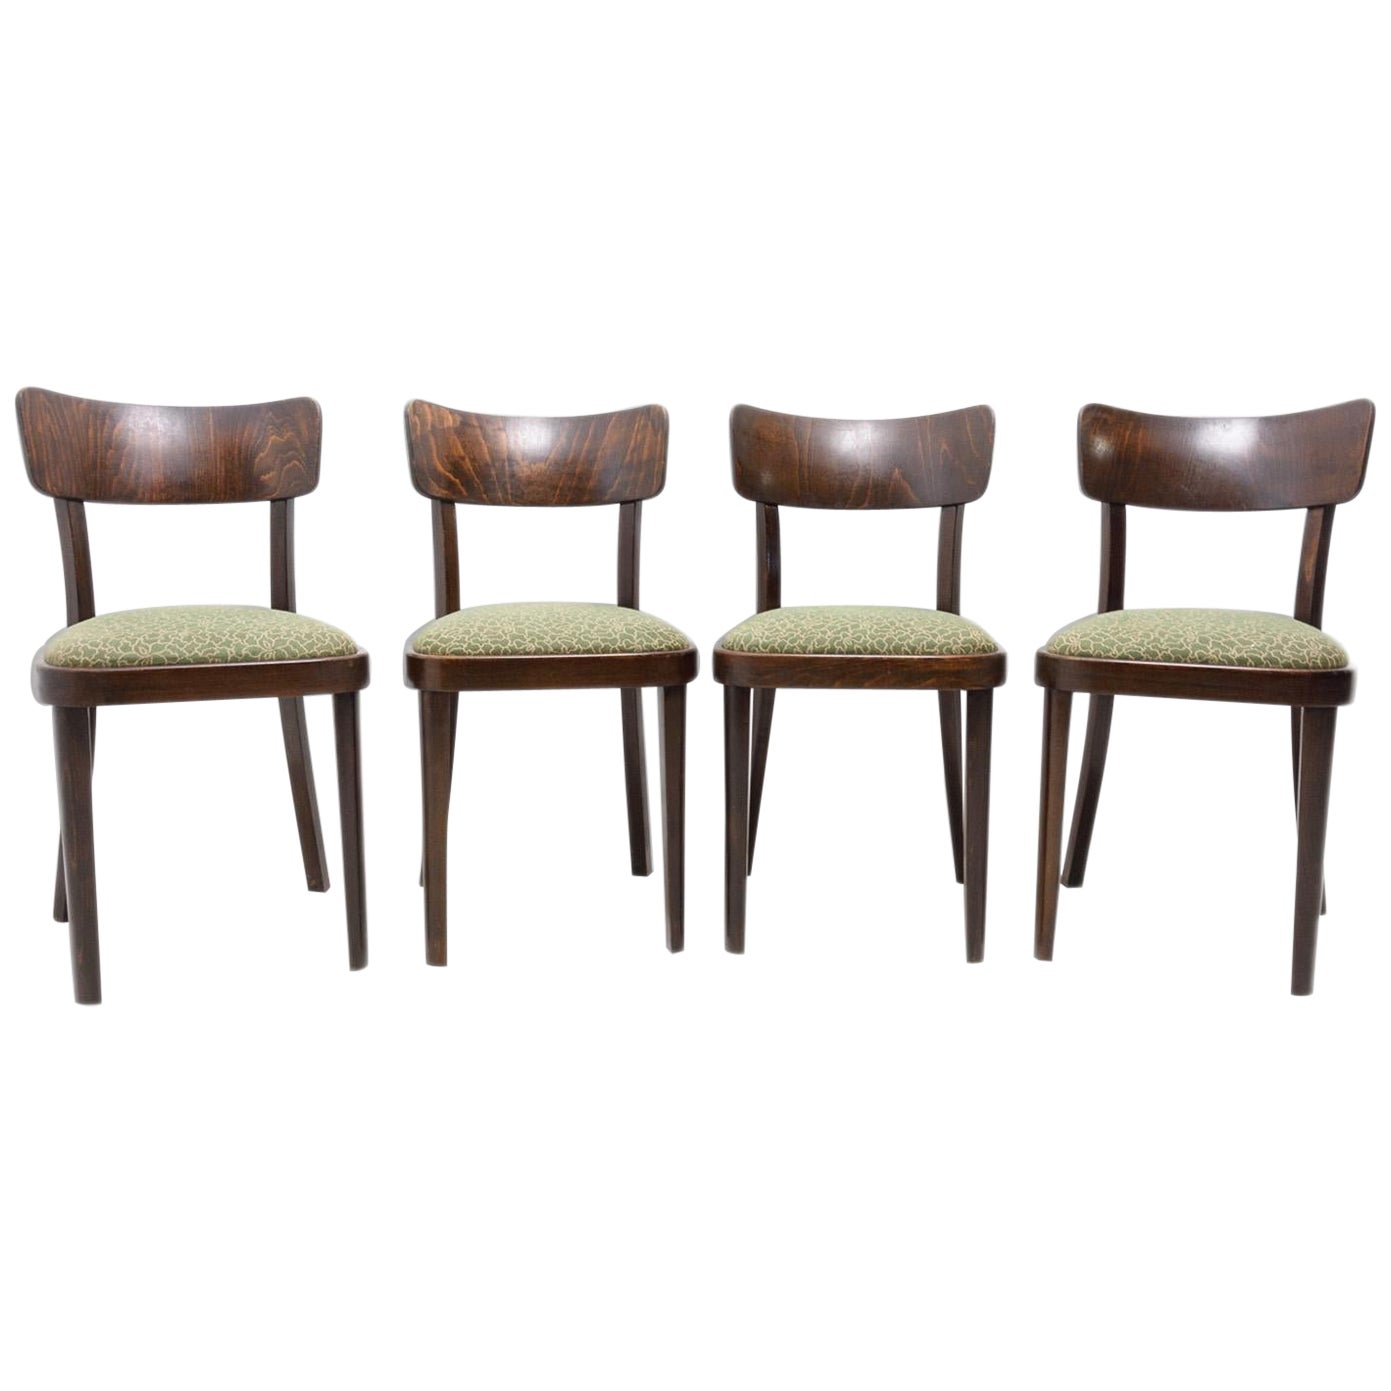 Set of Four Thonet Dining Chairs, Czechoslovakia, 1950